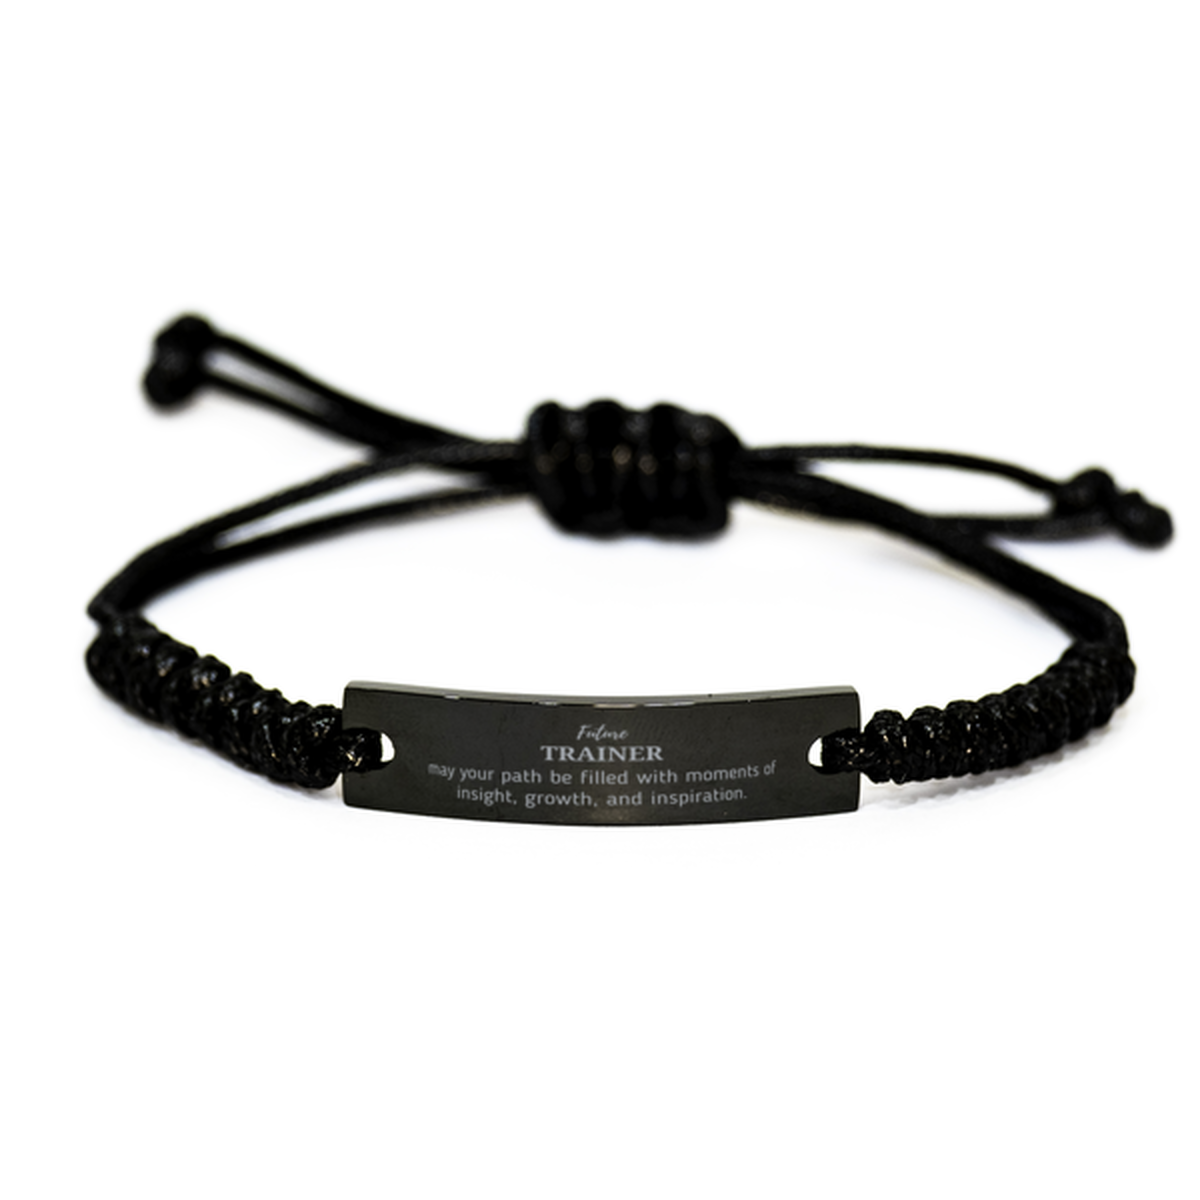 Future Trainer Gifts, May your path be filled with moments of insight, Graduation Gifts for New Trainer, Christmas Unique Black Rope Bracelet For Men, Women, Friends